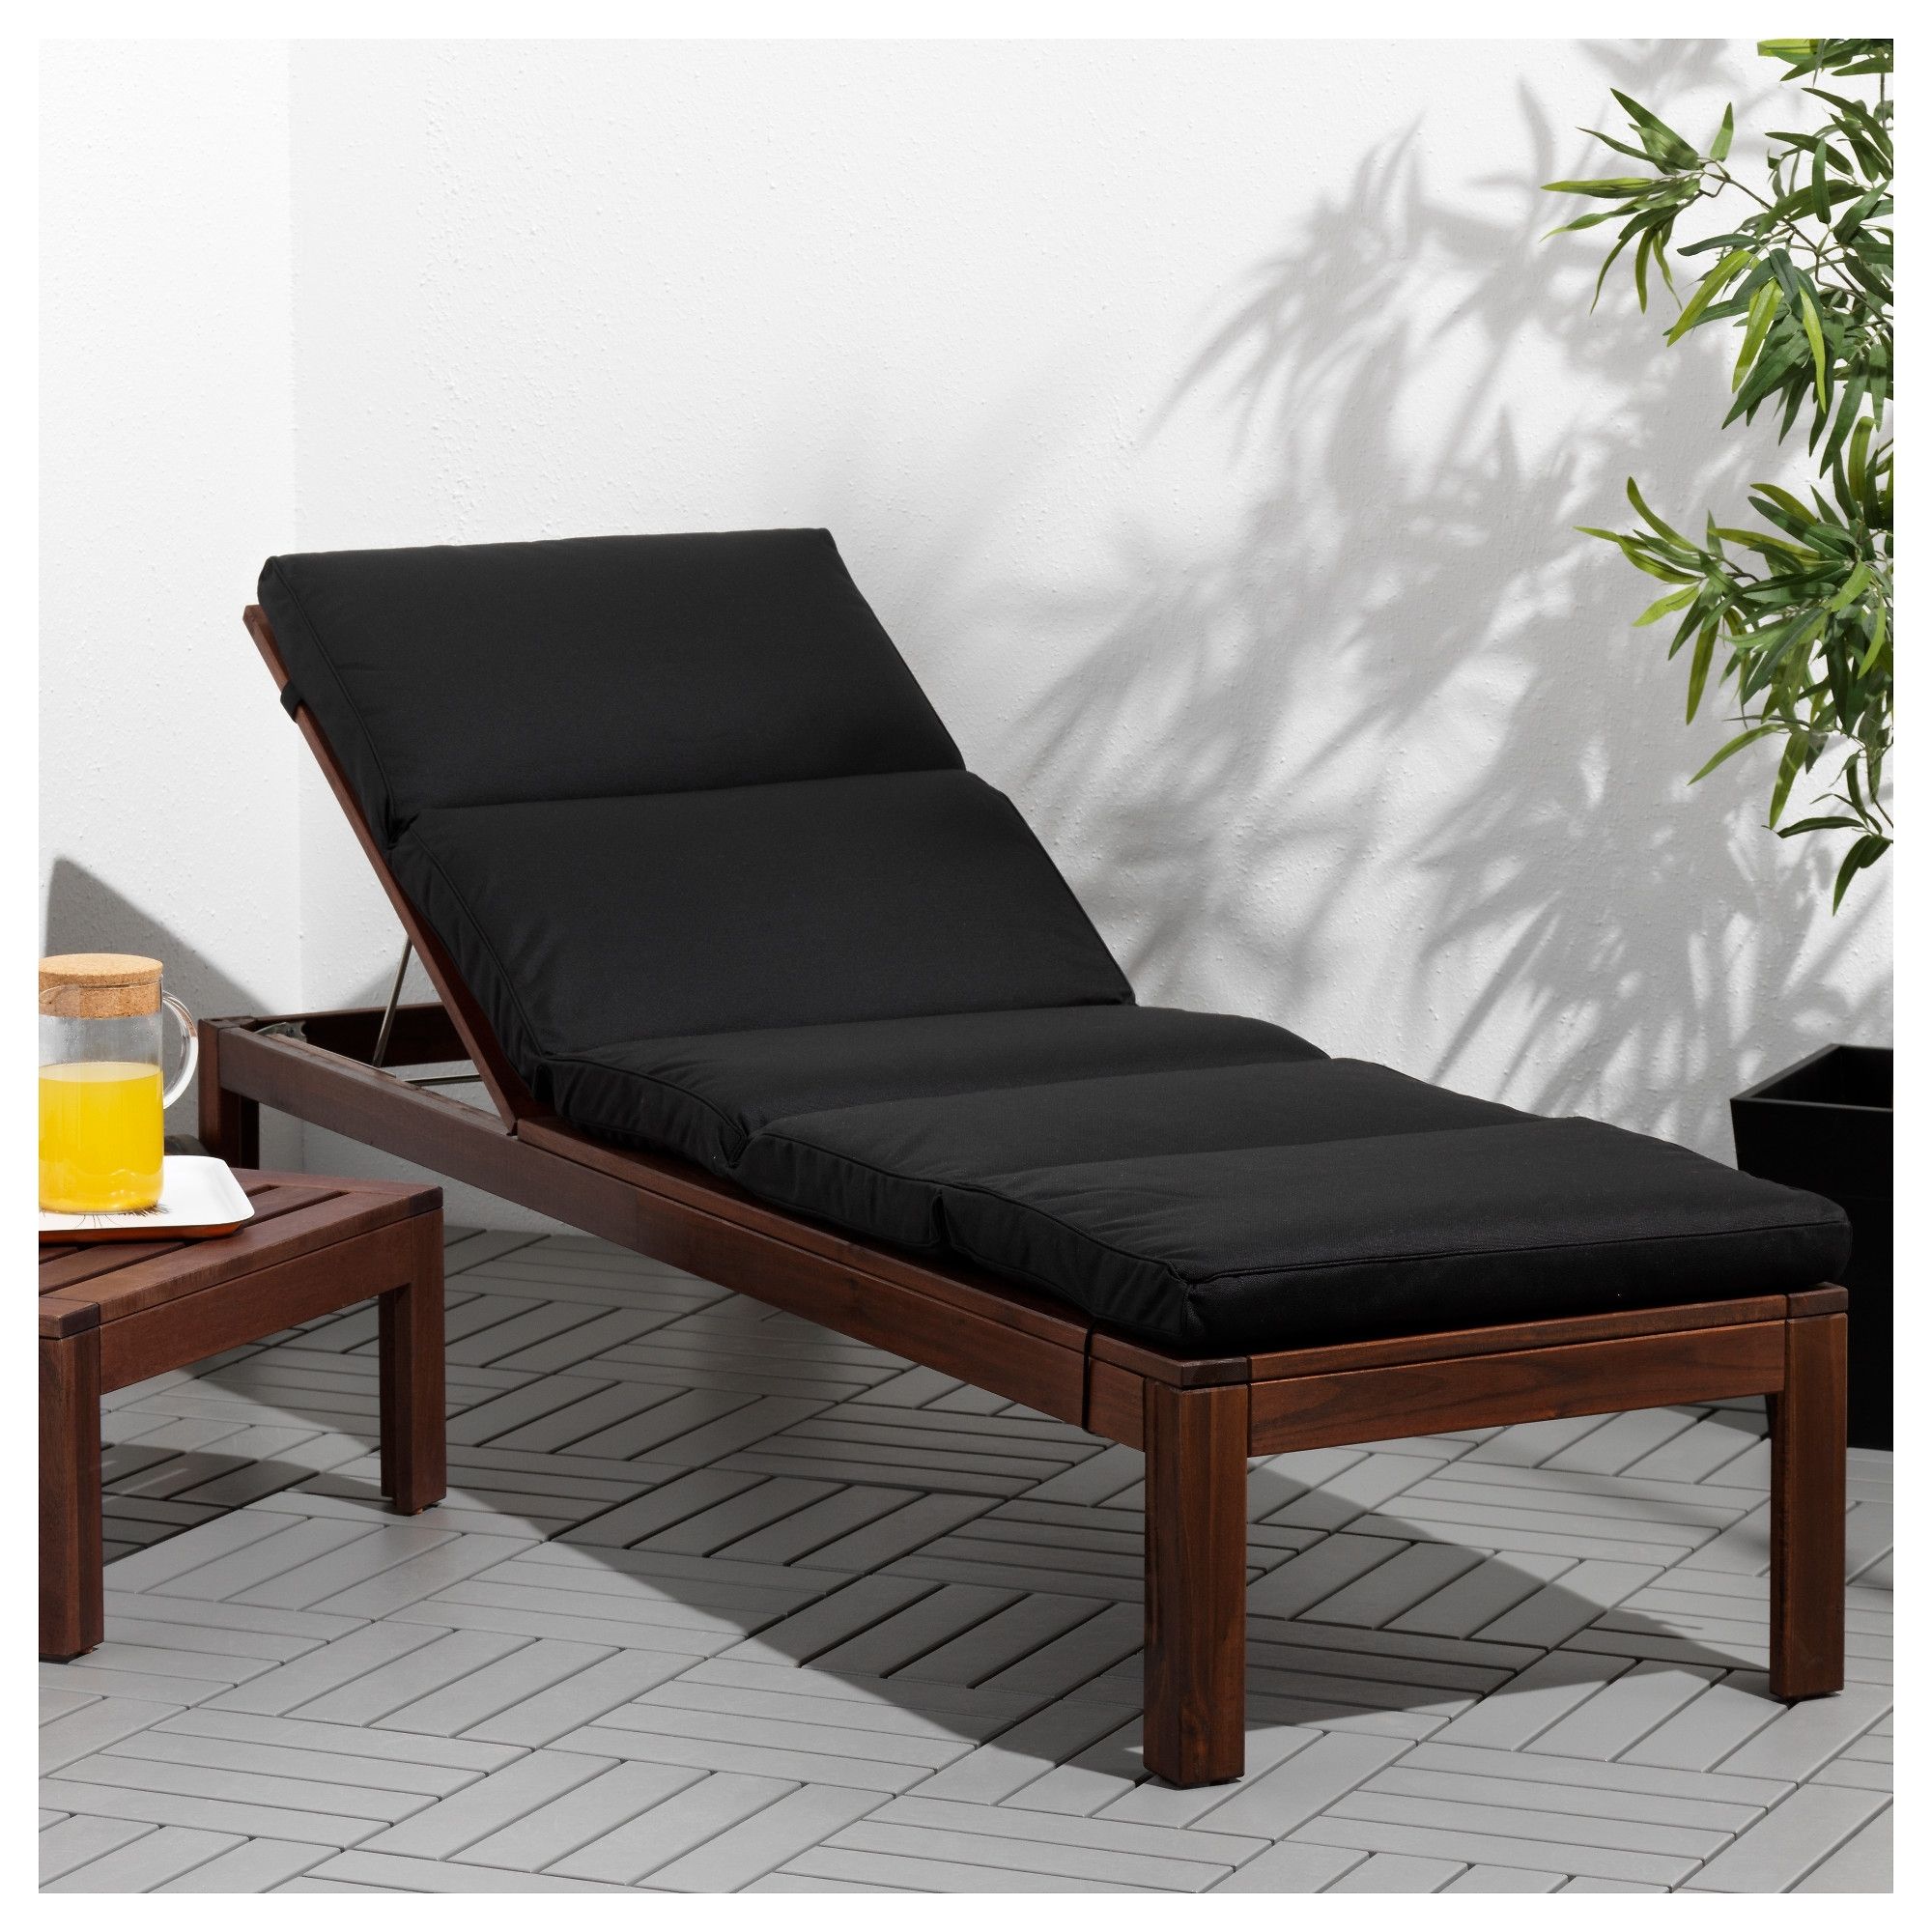 Most Recent Äpplarö Chaise – Ikea Pertaining To Ikea Outdoor Chaise Lounge Chairs (View 10 of 15)